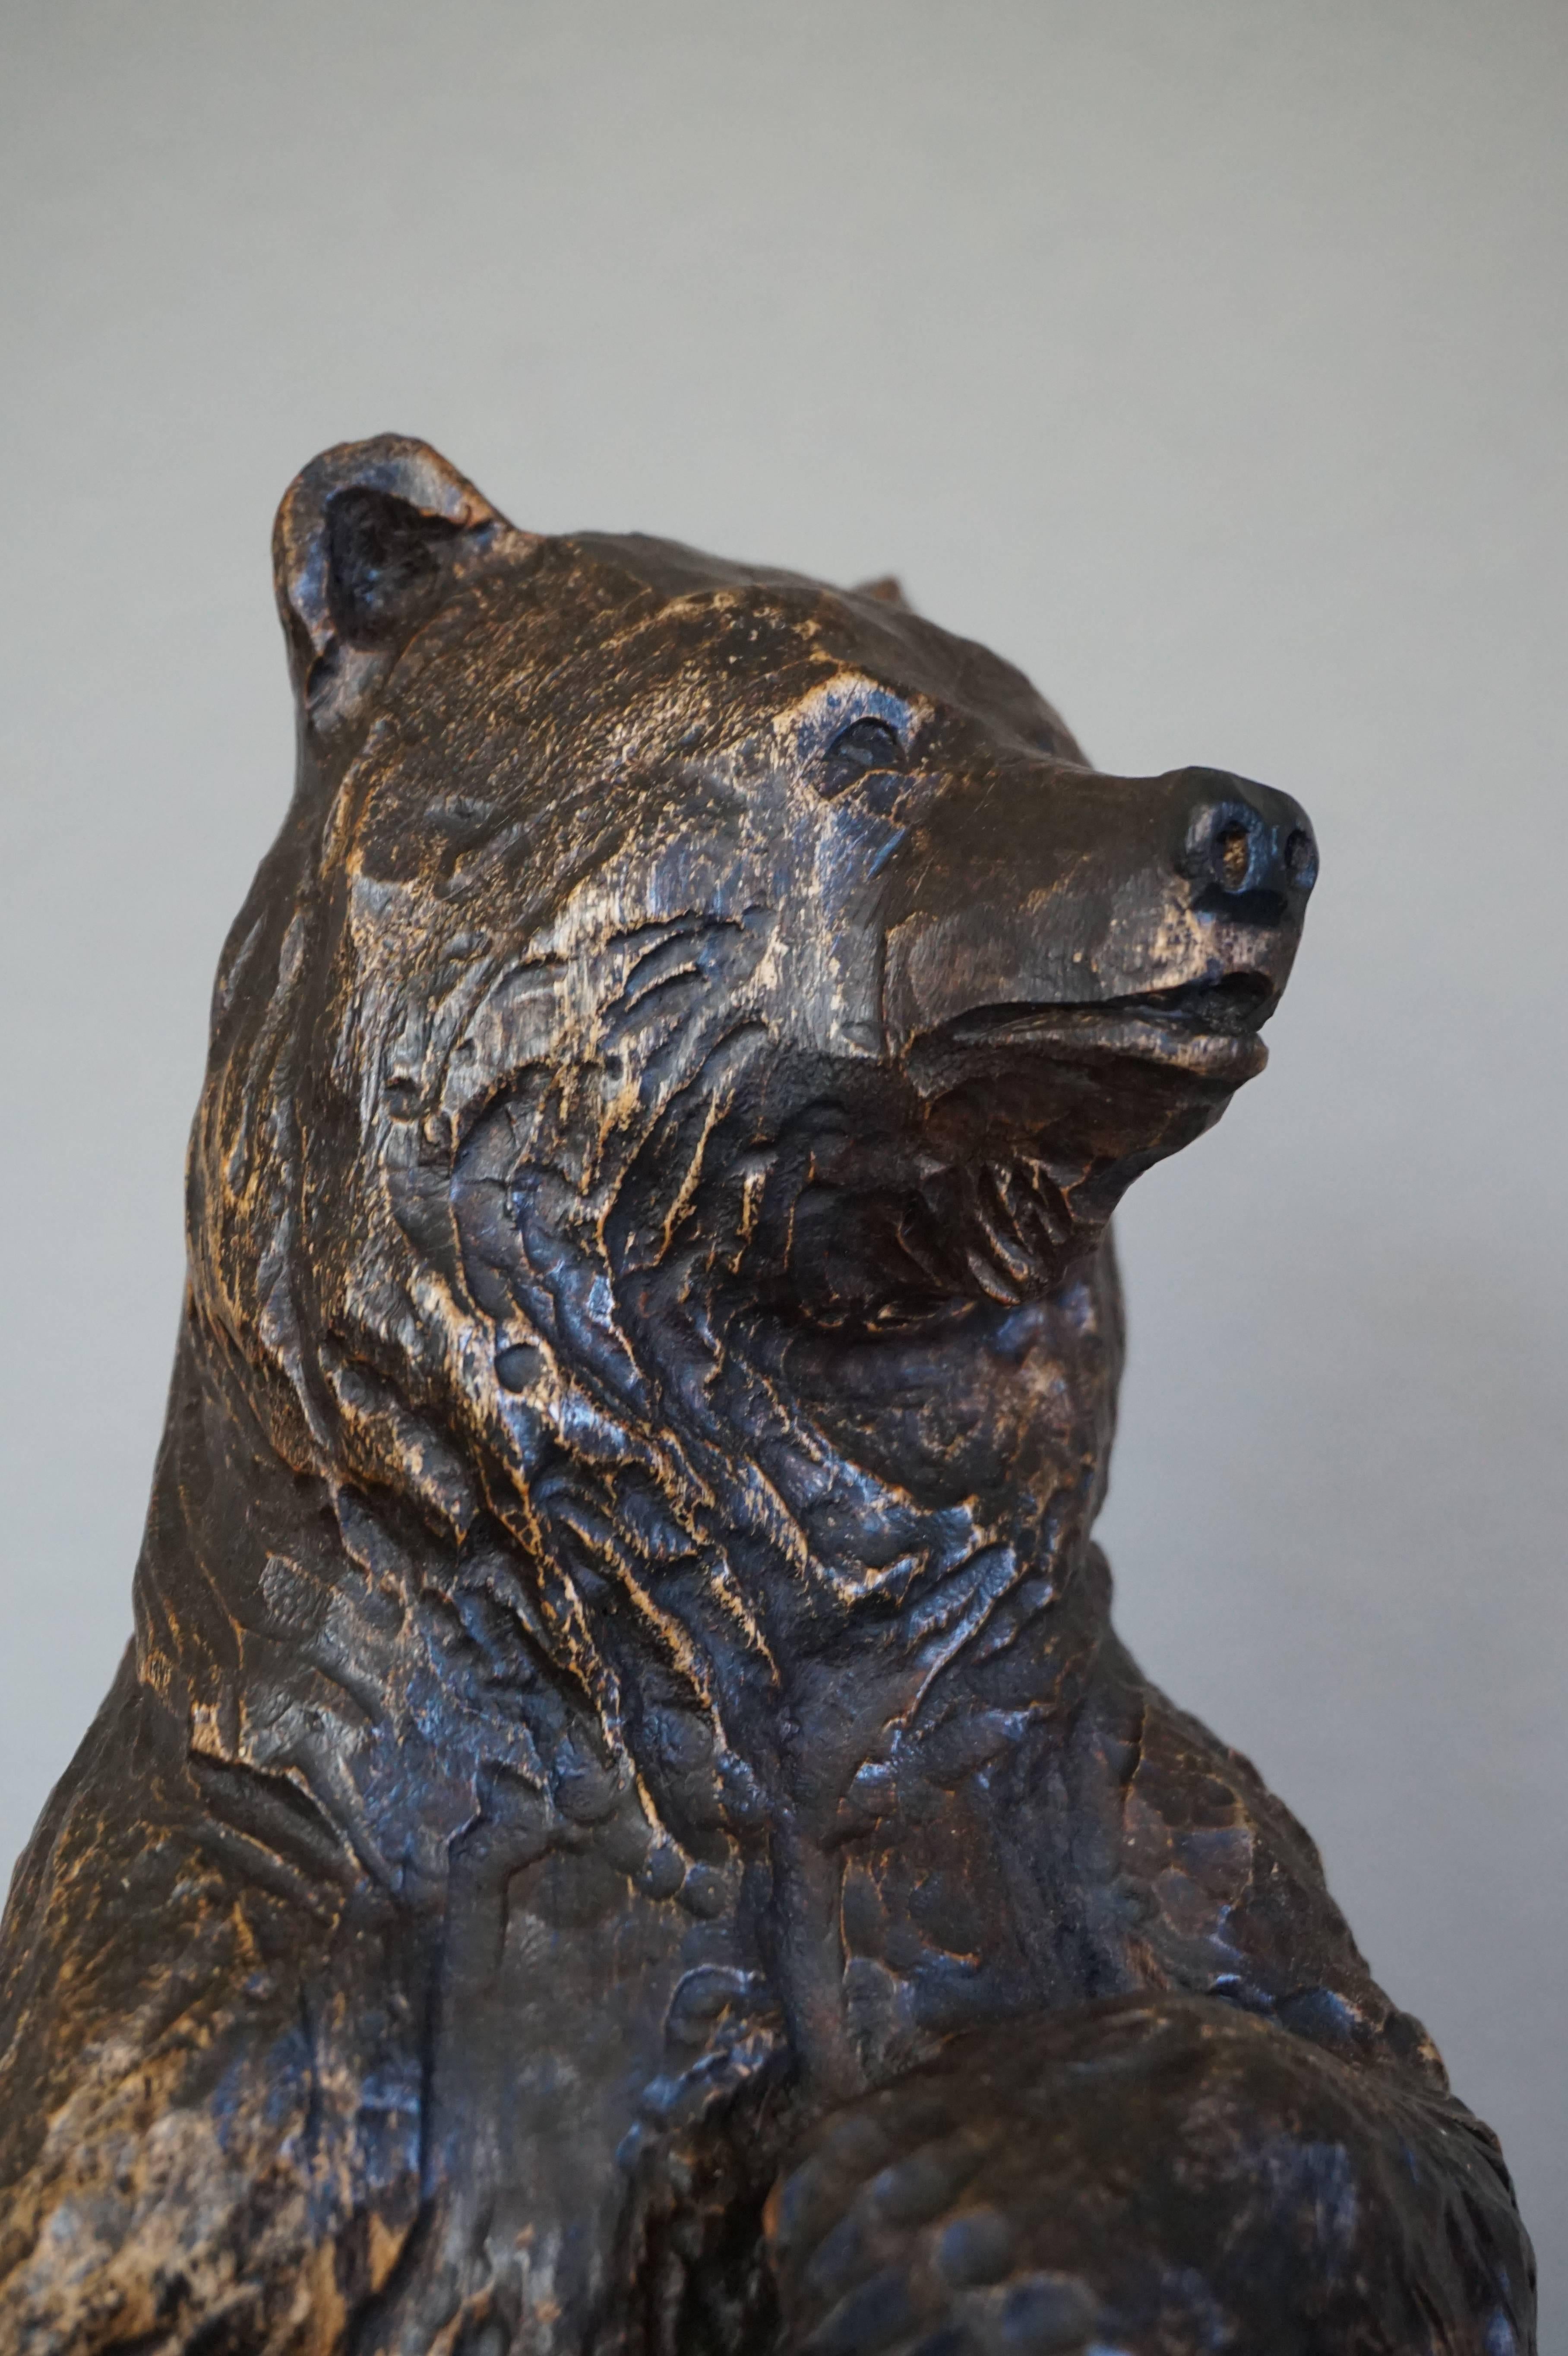 Beautiful quality and perfect condition bear(s) sculpture.

The artist who made this wonderful bear sculpture has perfectly captured the natural poisture of a standing mama bear scanning her surrounding for food or danger. The innocent and shy